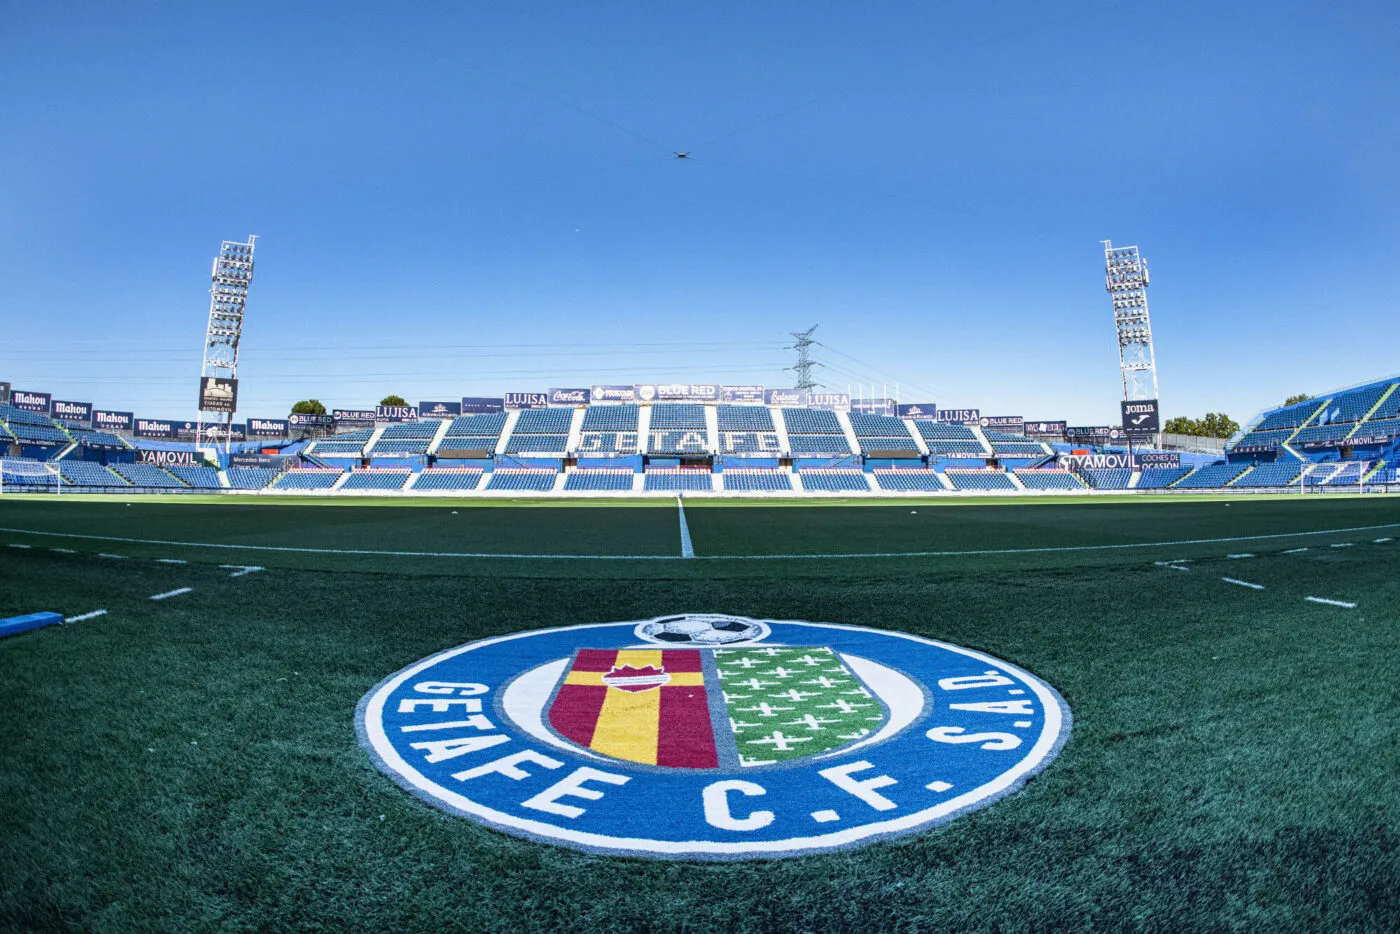 GETAFE, 05-08-2023, Coliseum Alfonso Pérez, football, Dutch Eredivisie, season 2023 / 2024, Getafe - Vitesse, inside view of the stadium before the match Getafe - Vitesse - Photo by Icon sport during the Friendly match between Getafe and Vitesse on August 5, 2023 in Getafe, Spain. (Photo by ProShots/Icon Sport)